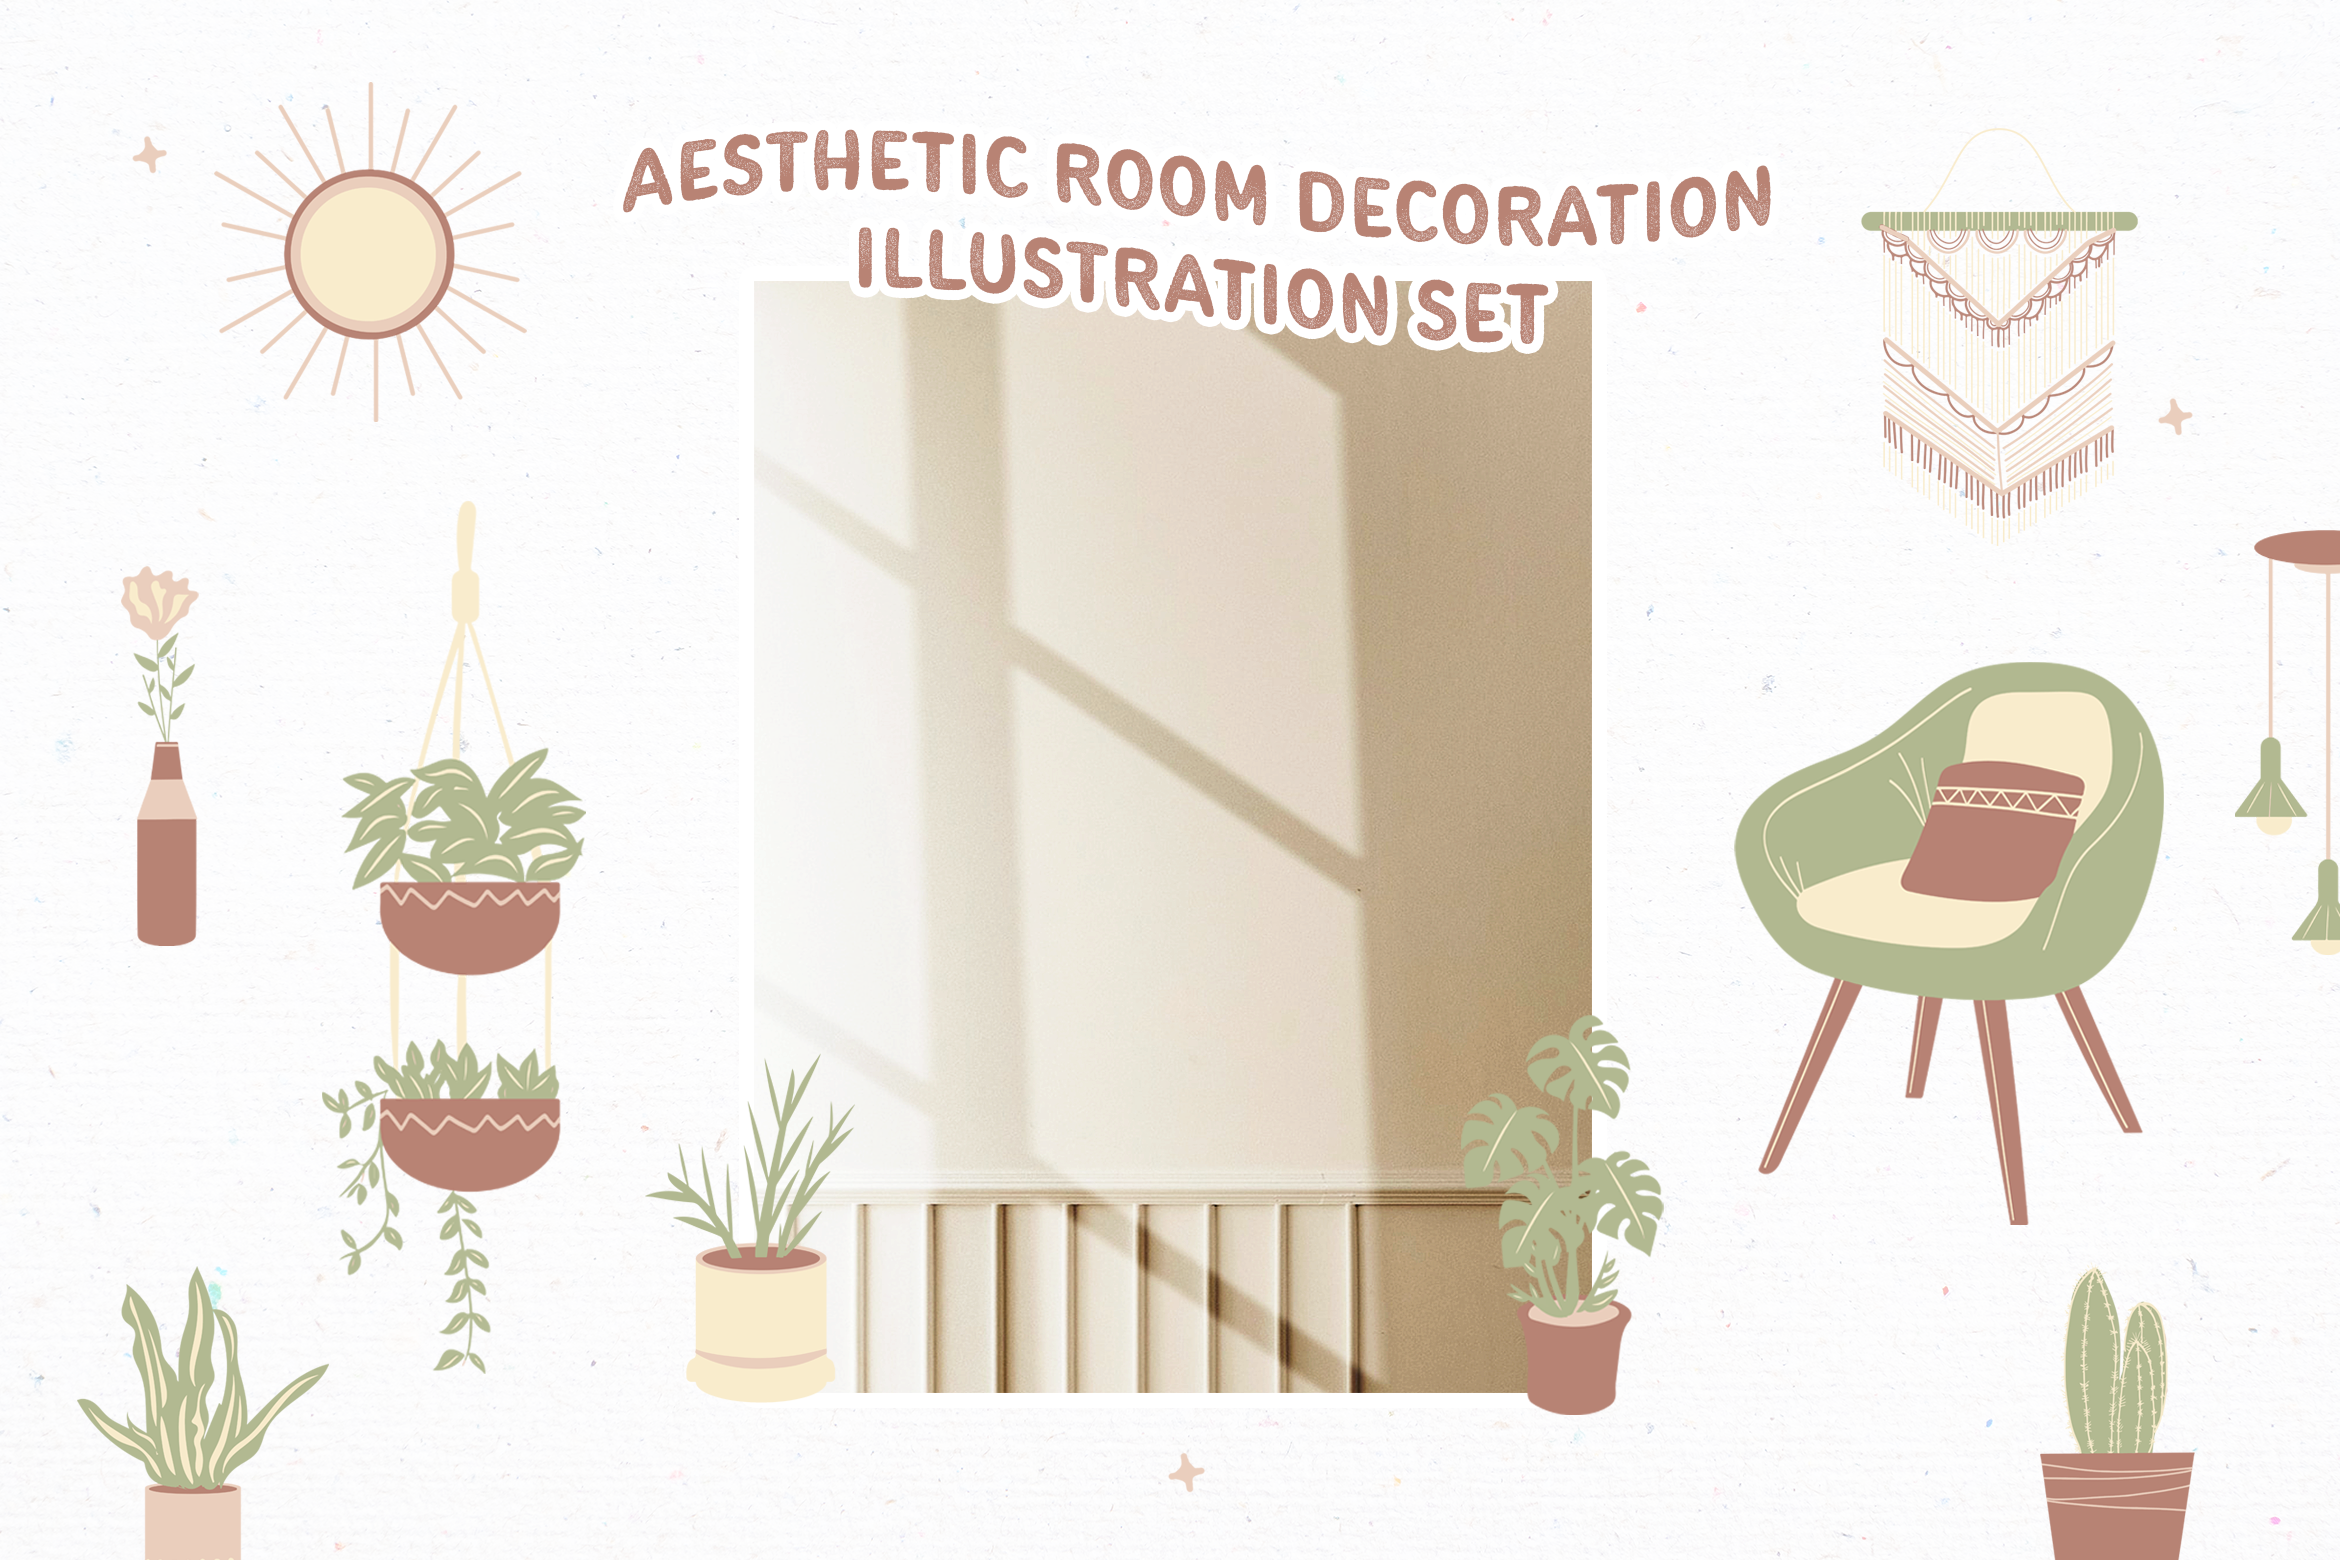 https://peterdraw.studio/wp-content/uploads/2022/09/Calming-Aesthetic-Room-Decoration-Illustration-Set-with-Old-Rose-Tan-Sage-and-Bleach-Almond-colors-5.png